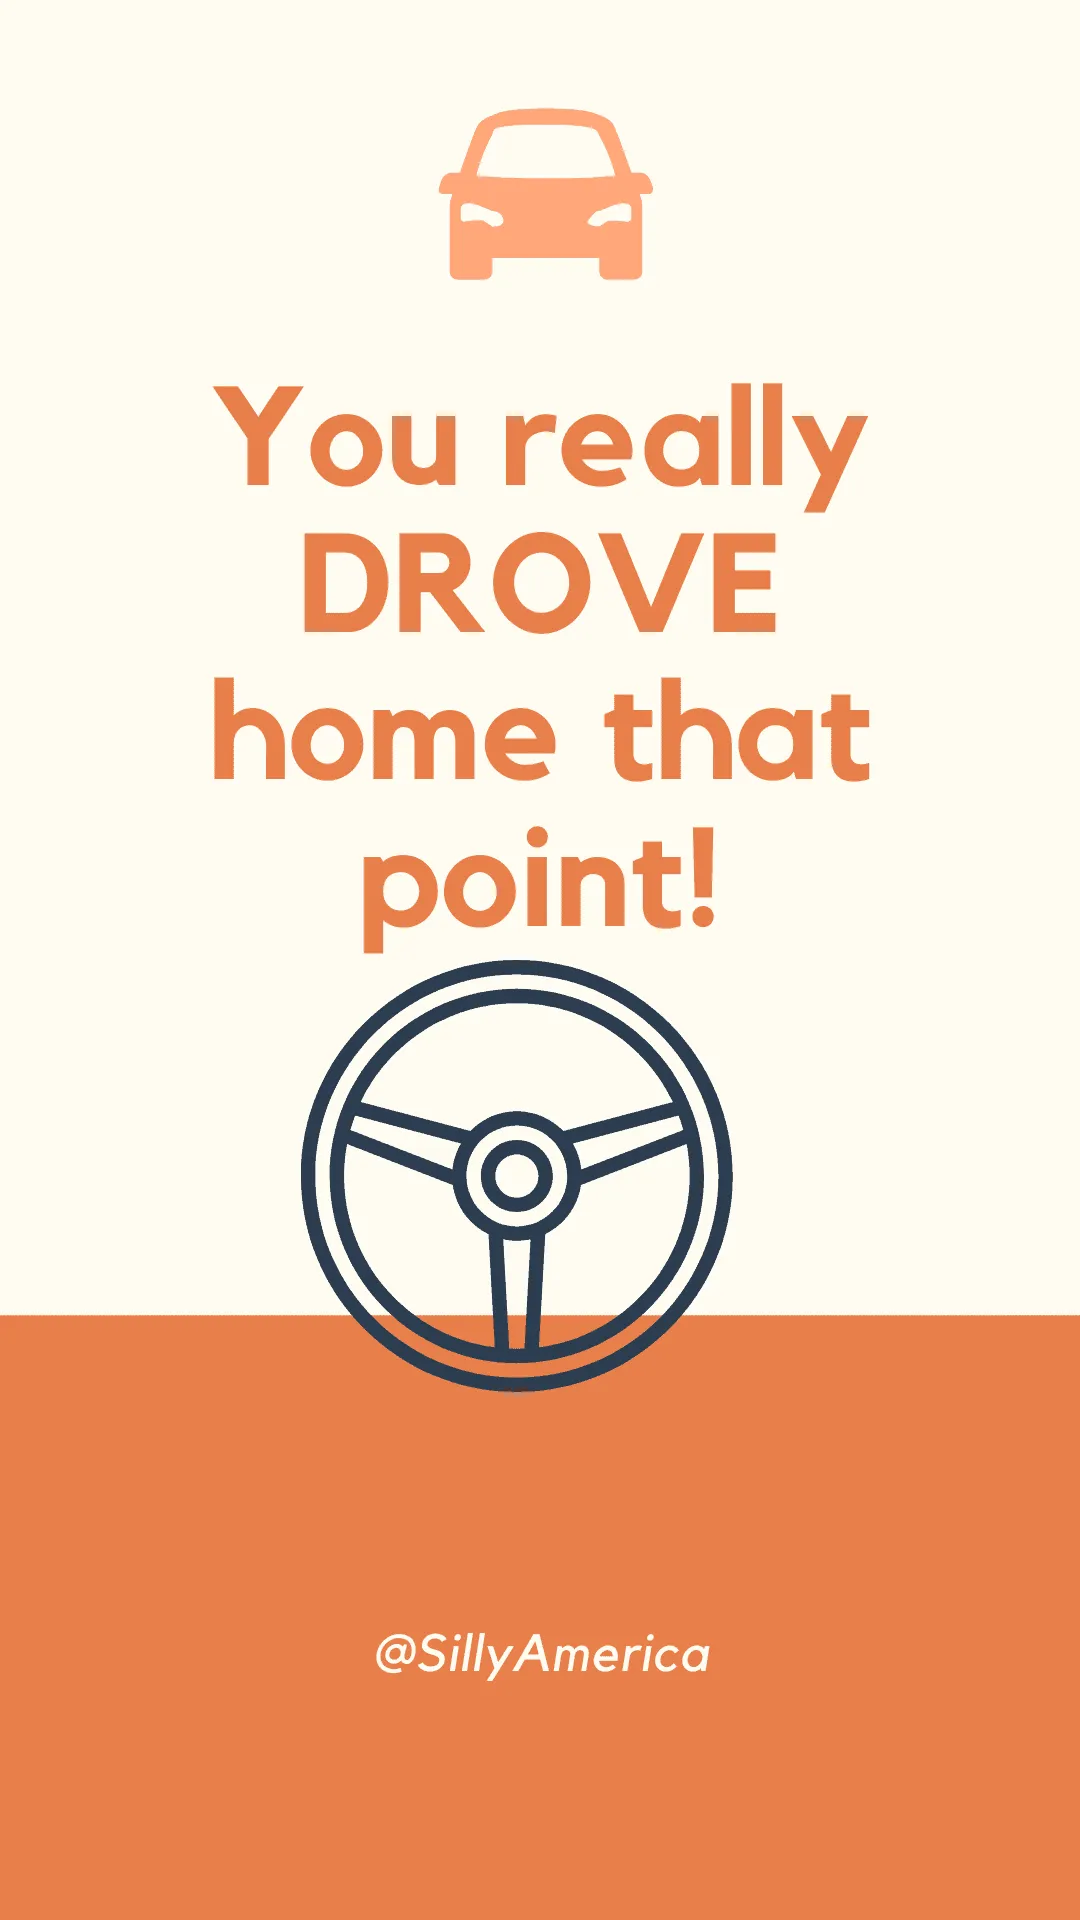 You really DROVE home that point! - Car Puns to fuel your road trip content!